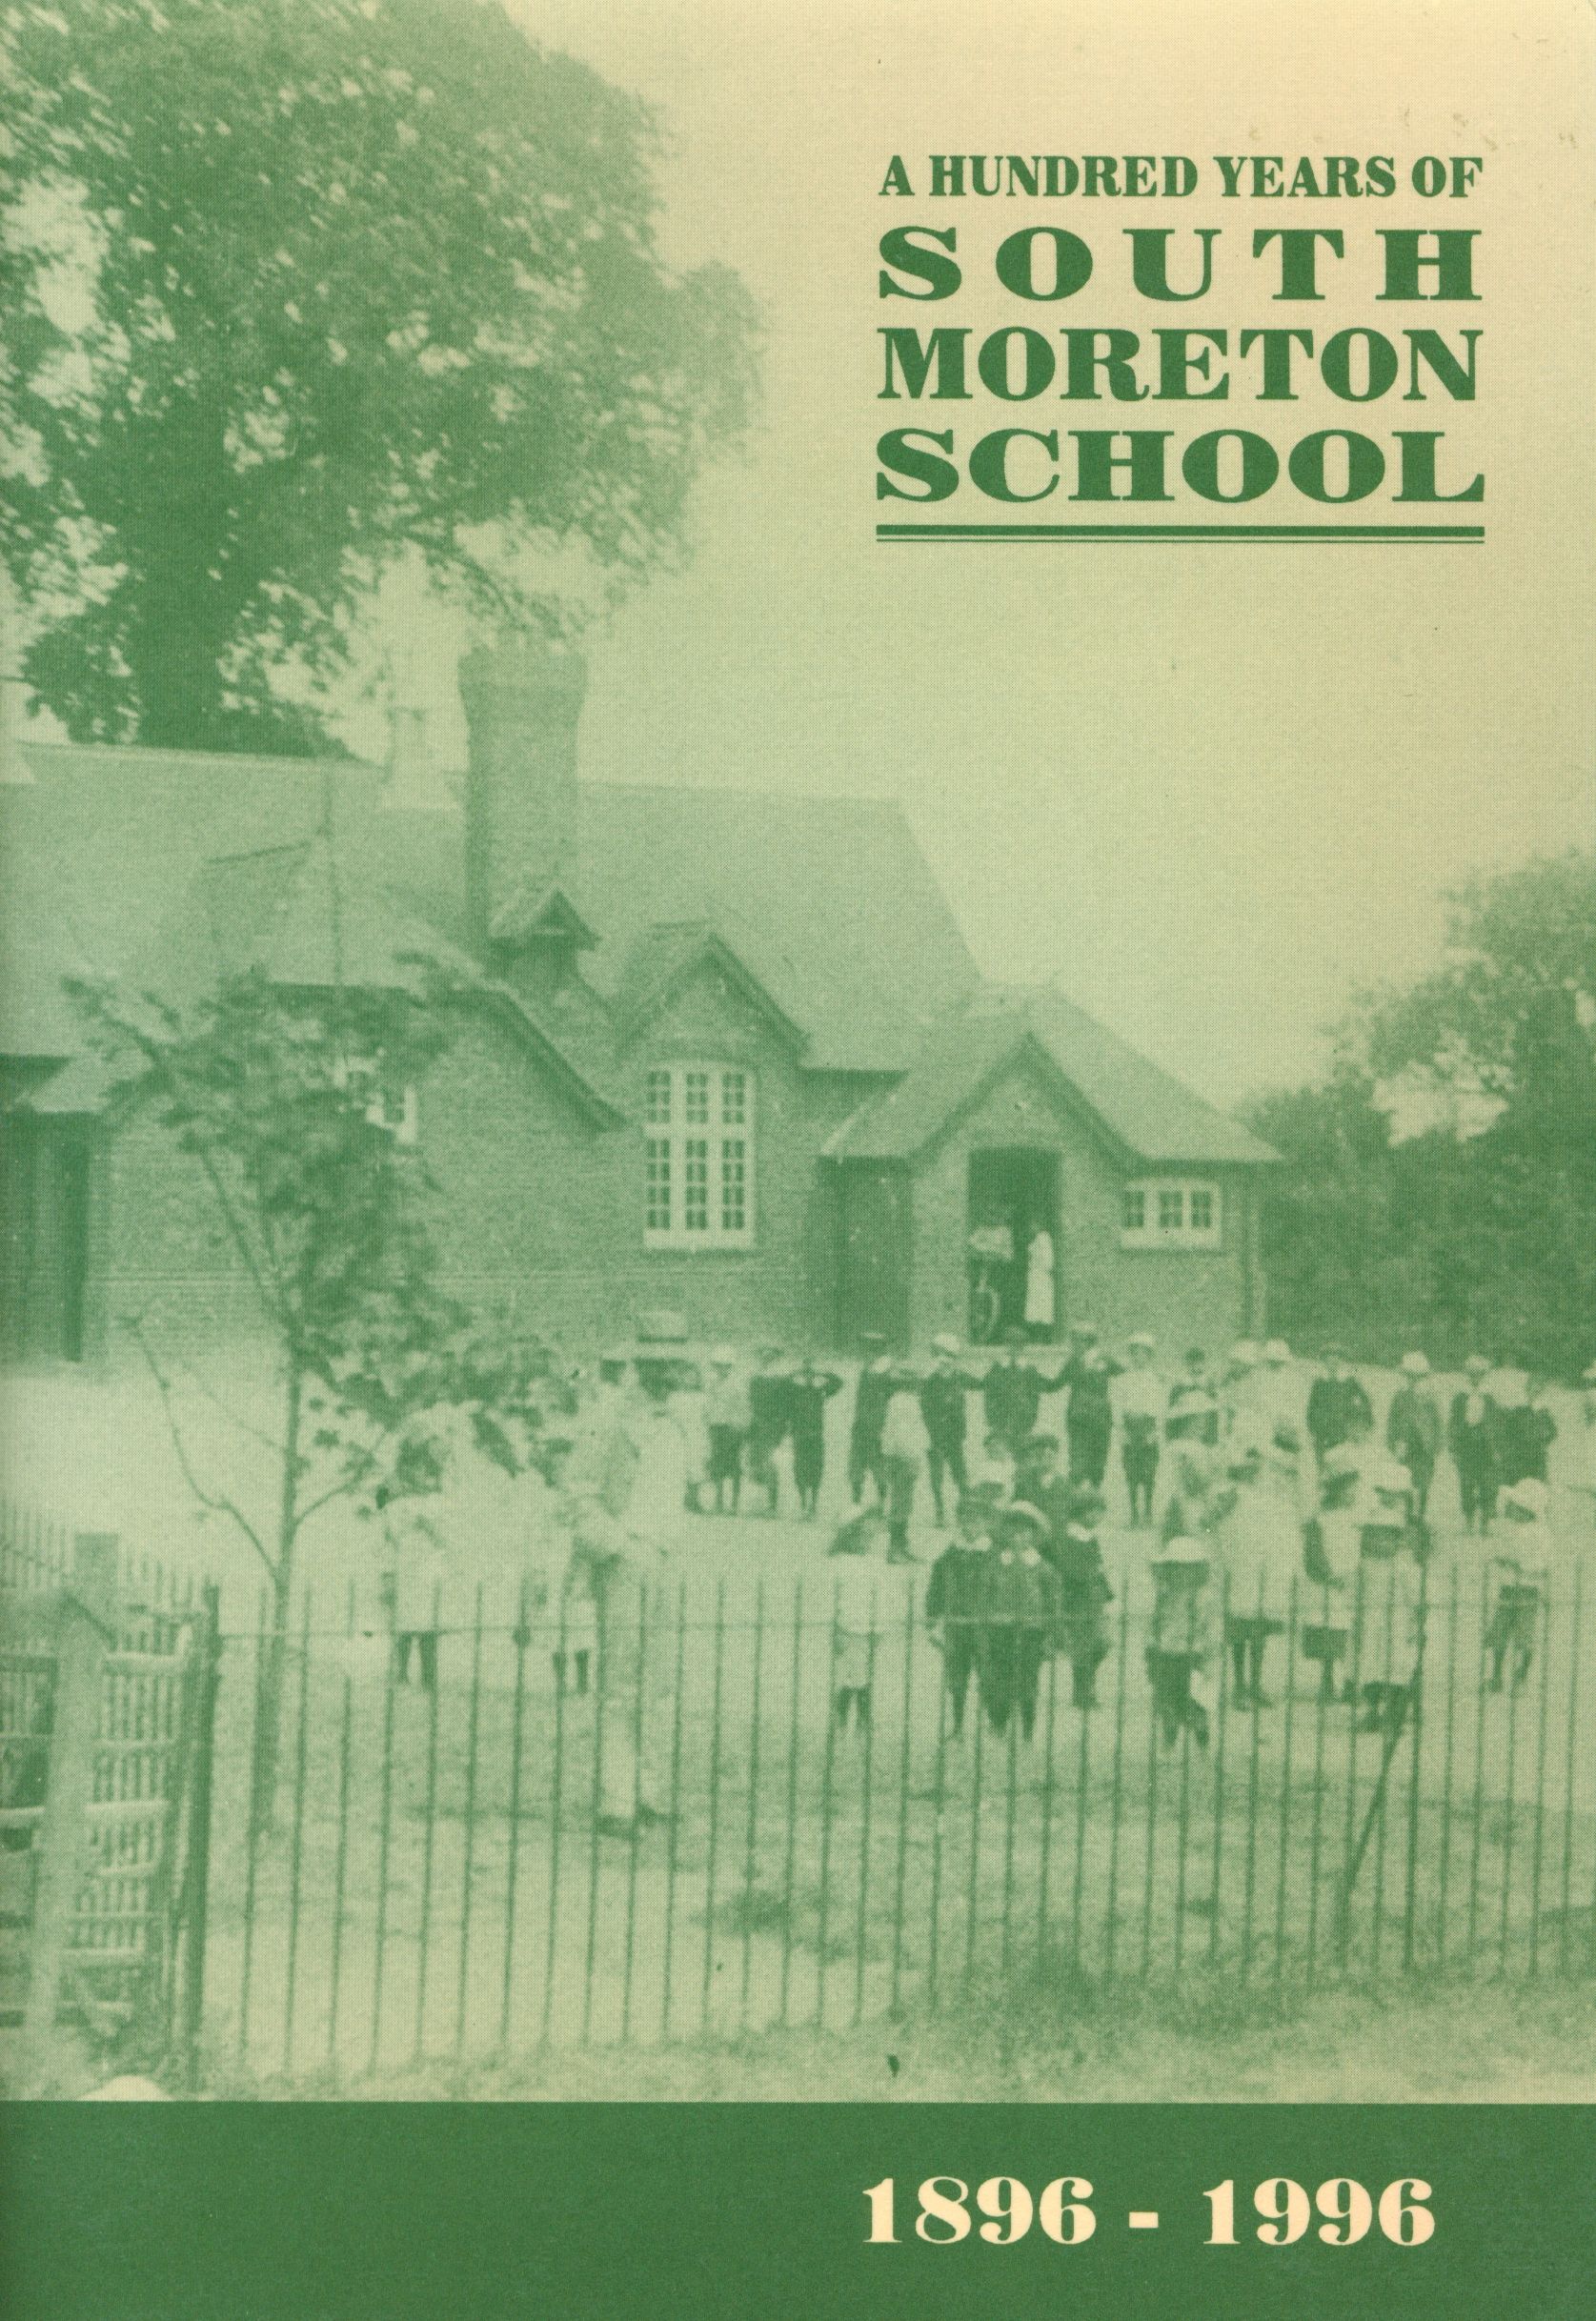 South Moreton School – A Hundred Years of